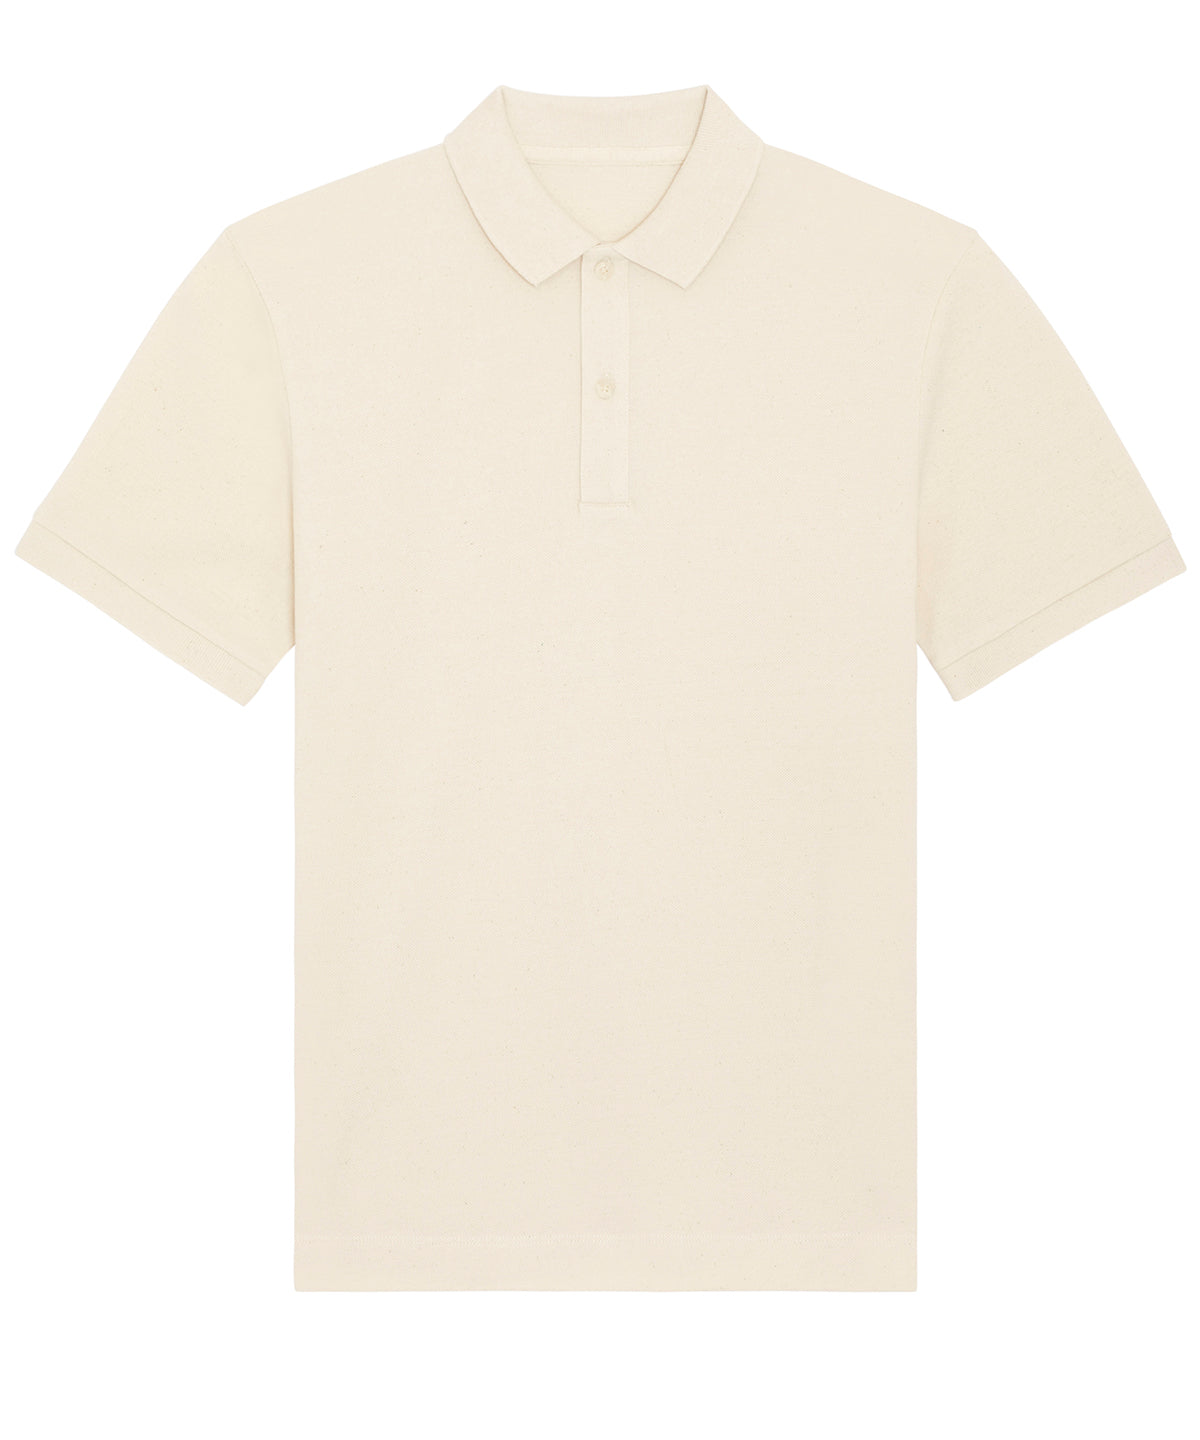 Stanley/Stella Prepster Unisex Short Sleeve Polo Natural Raw